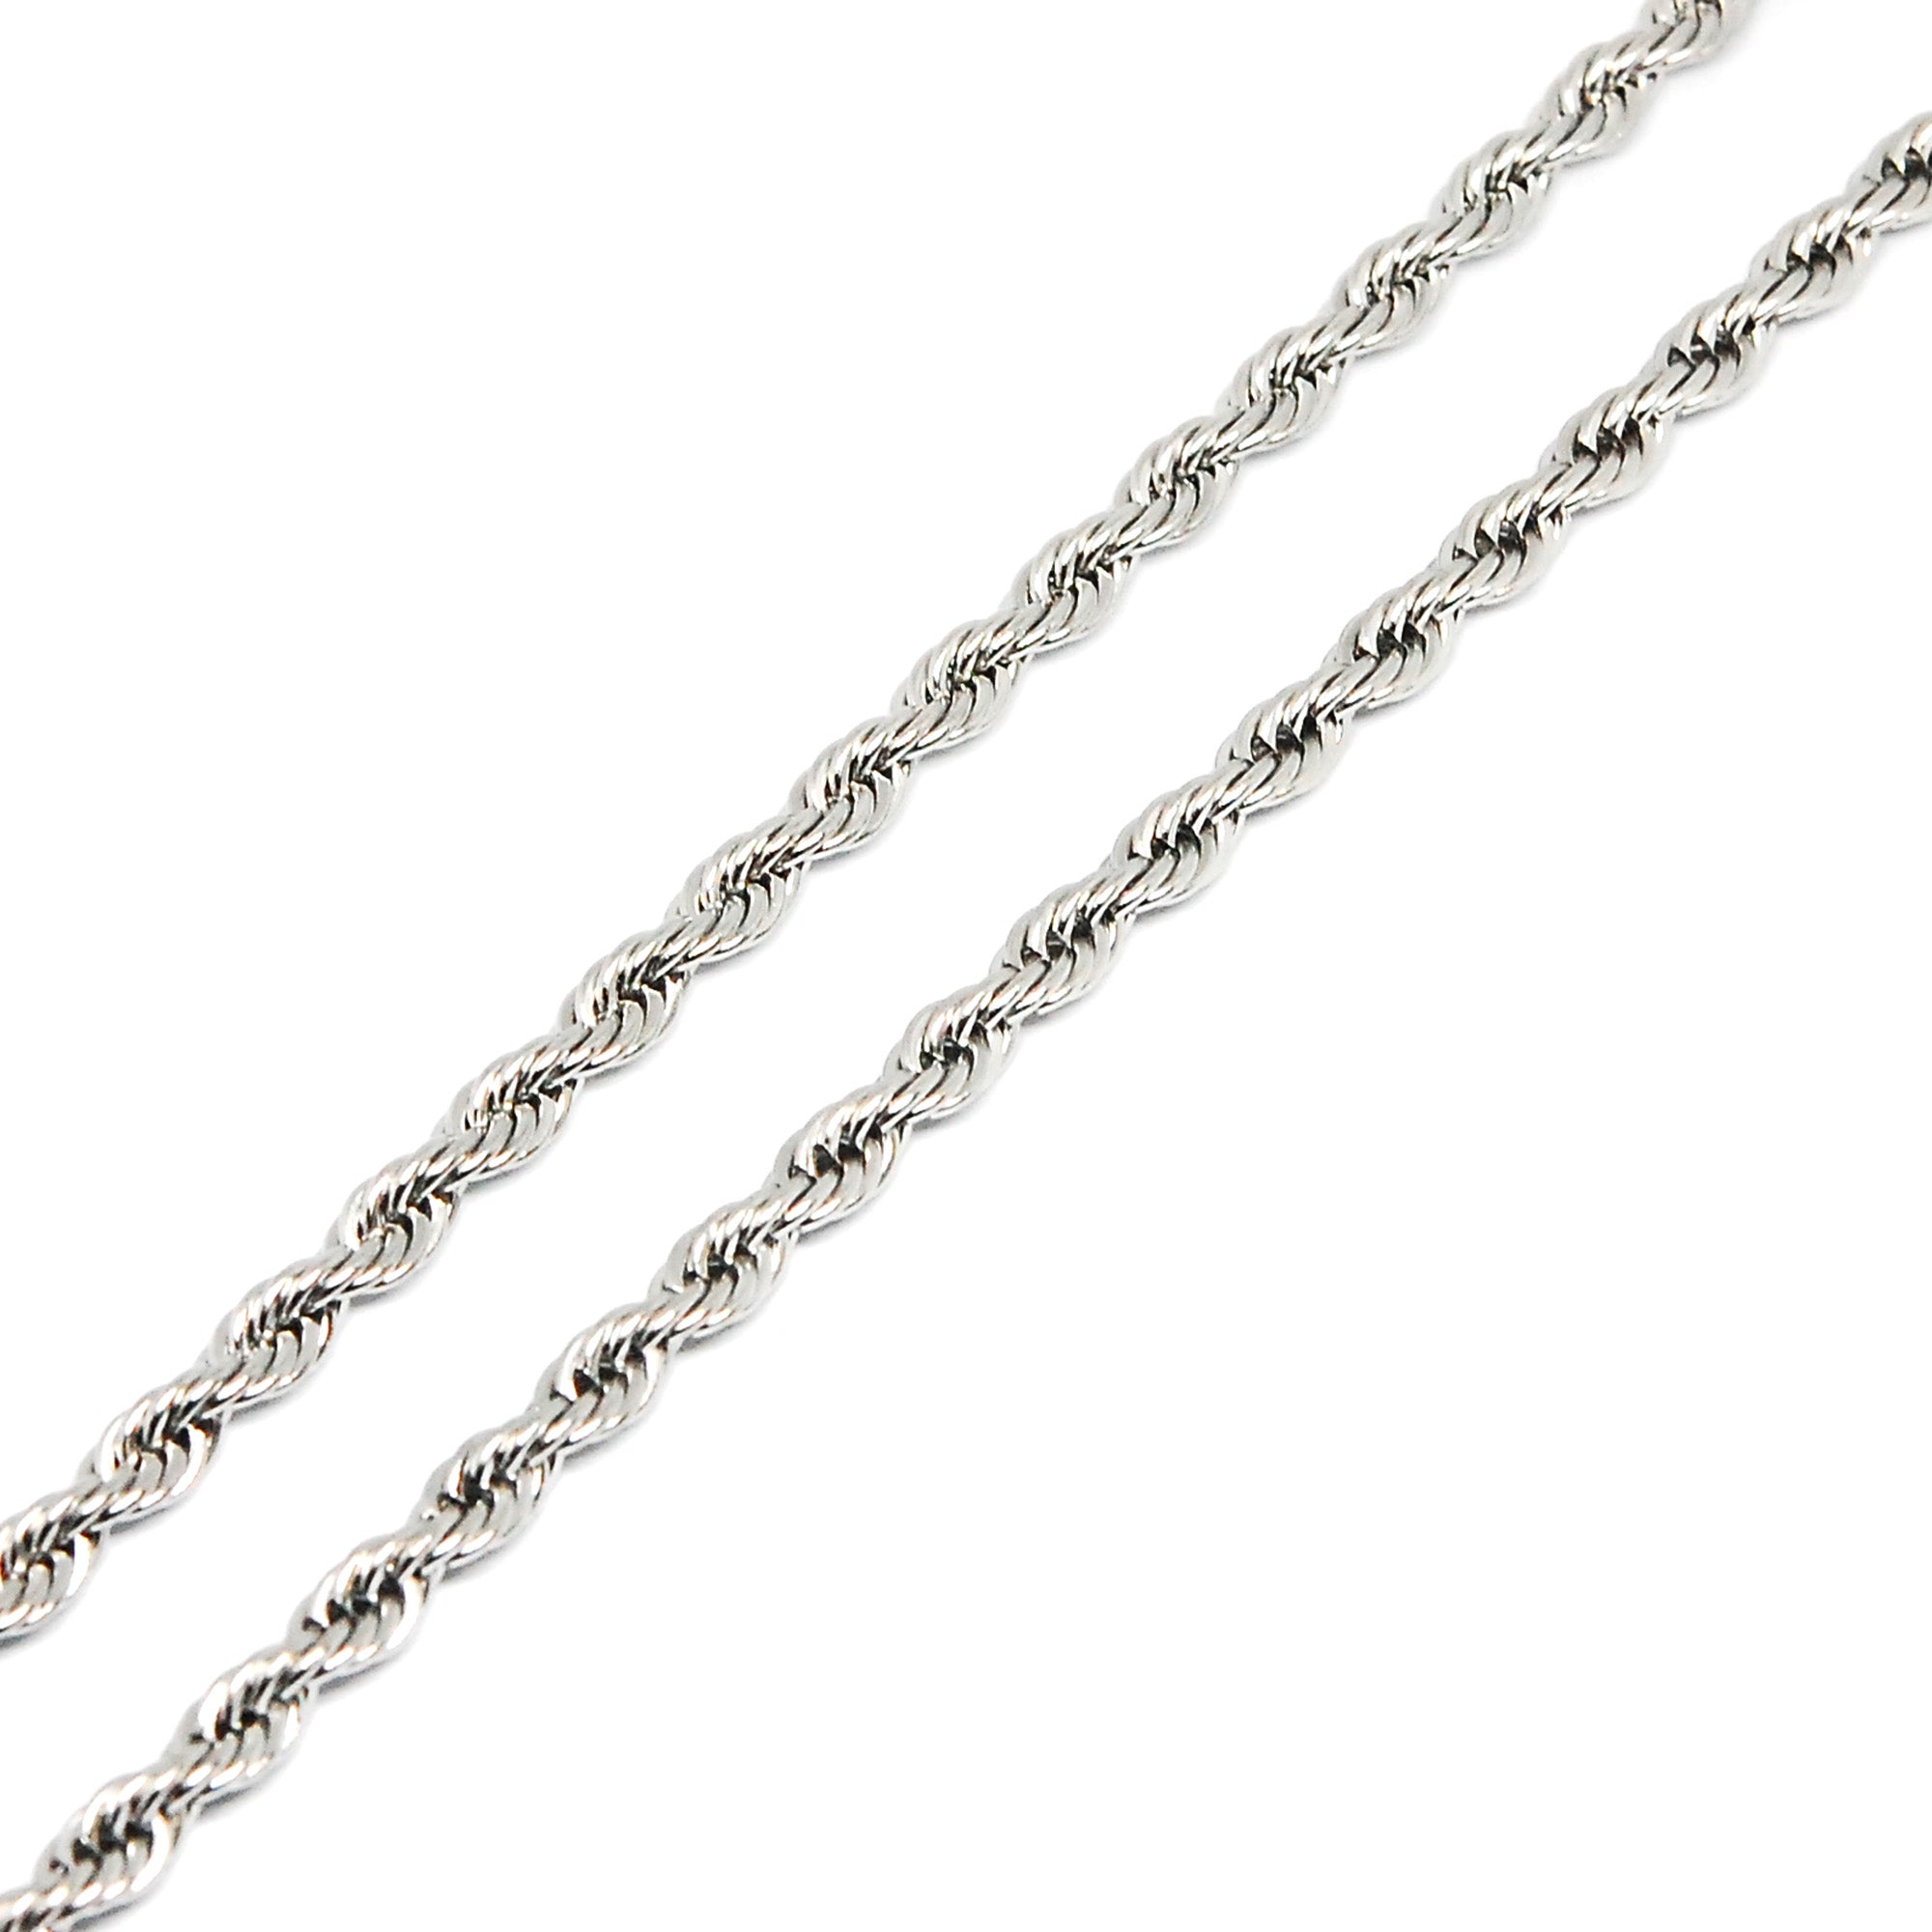 ESCH 7774: 23" S/S Large Twisted Rope Chain (4mm)